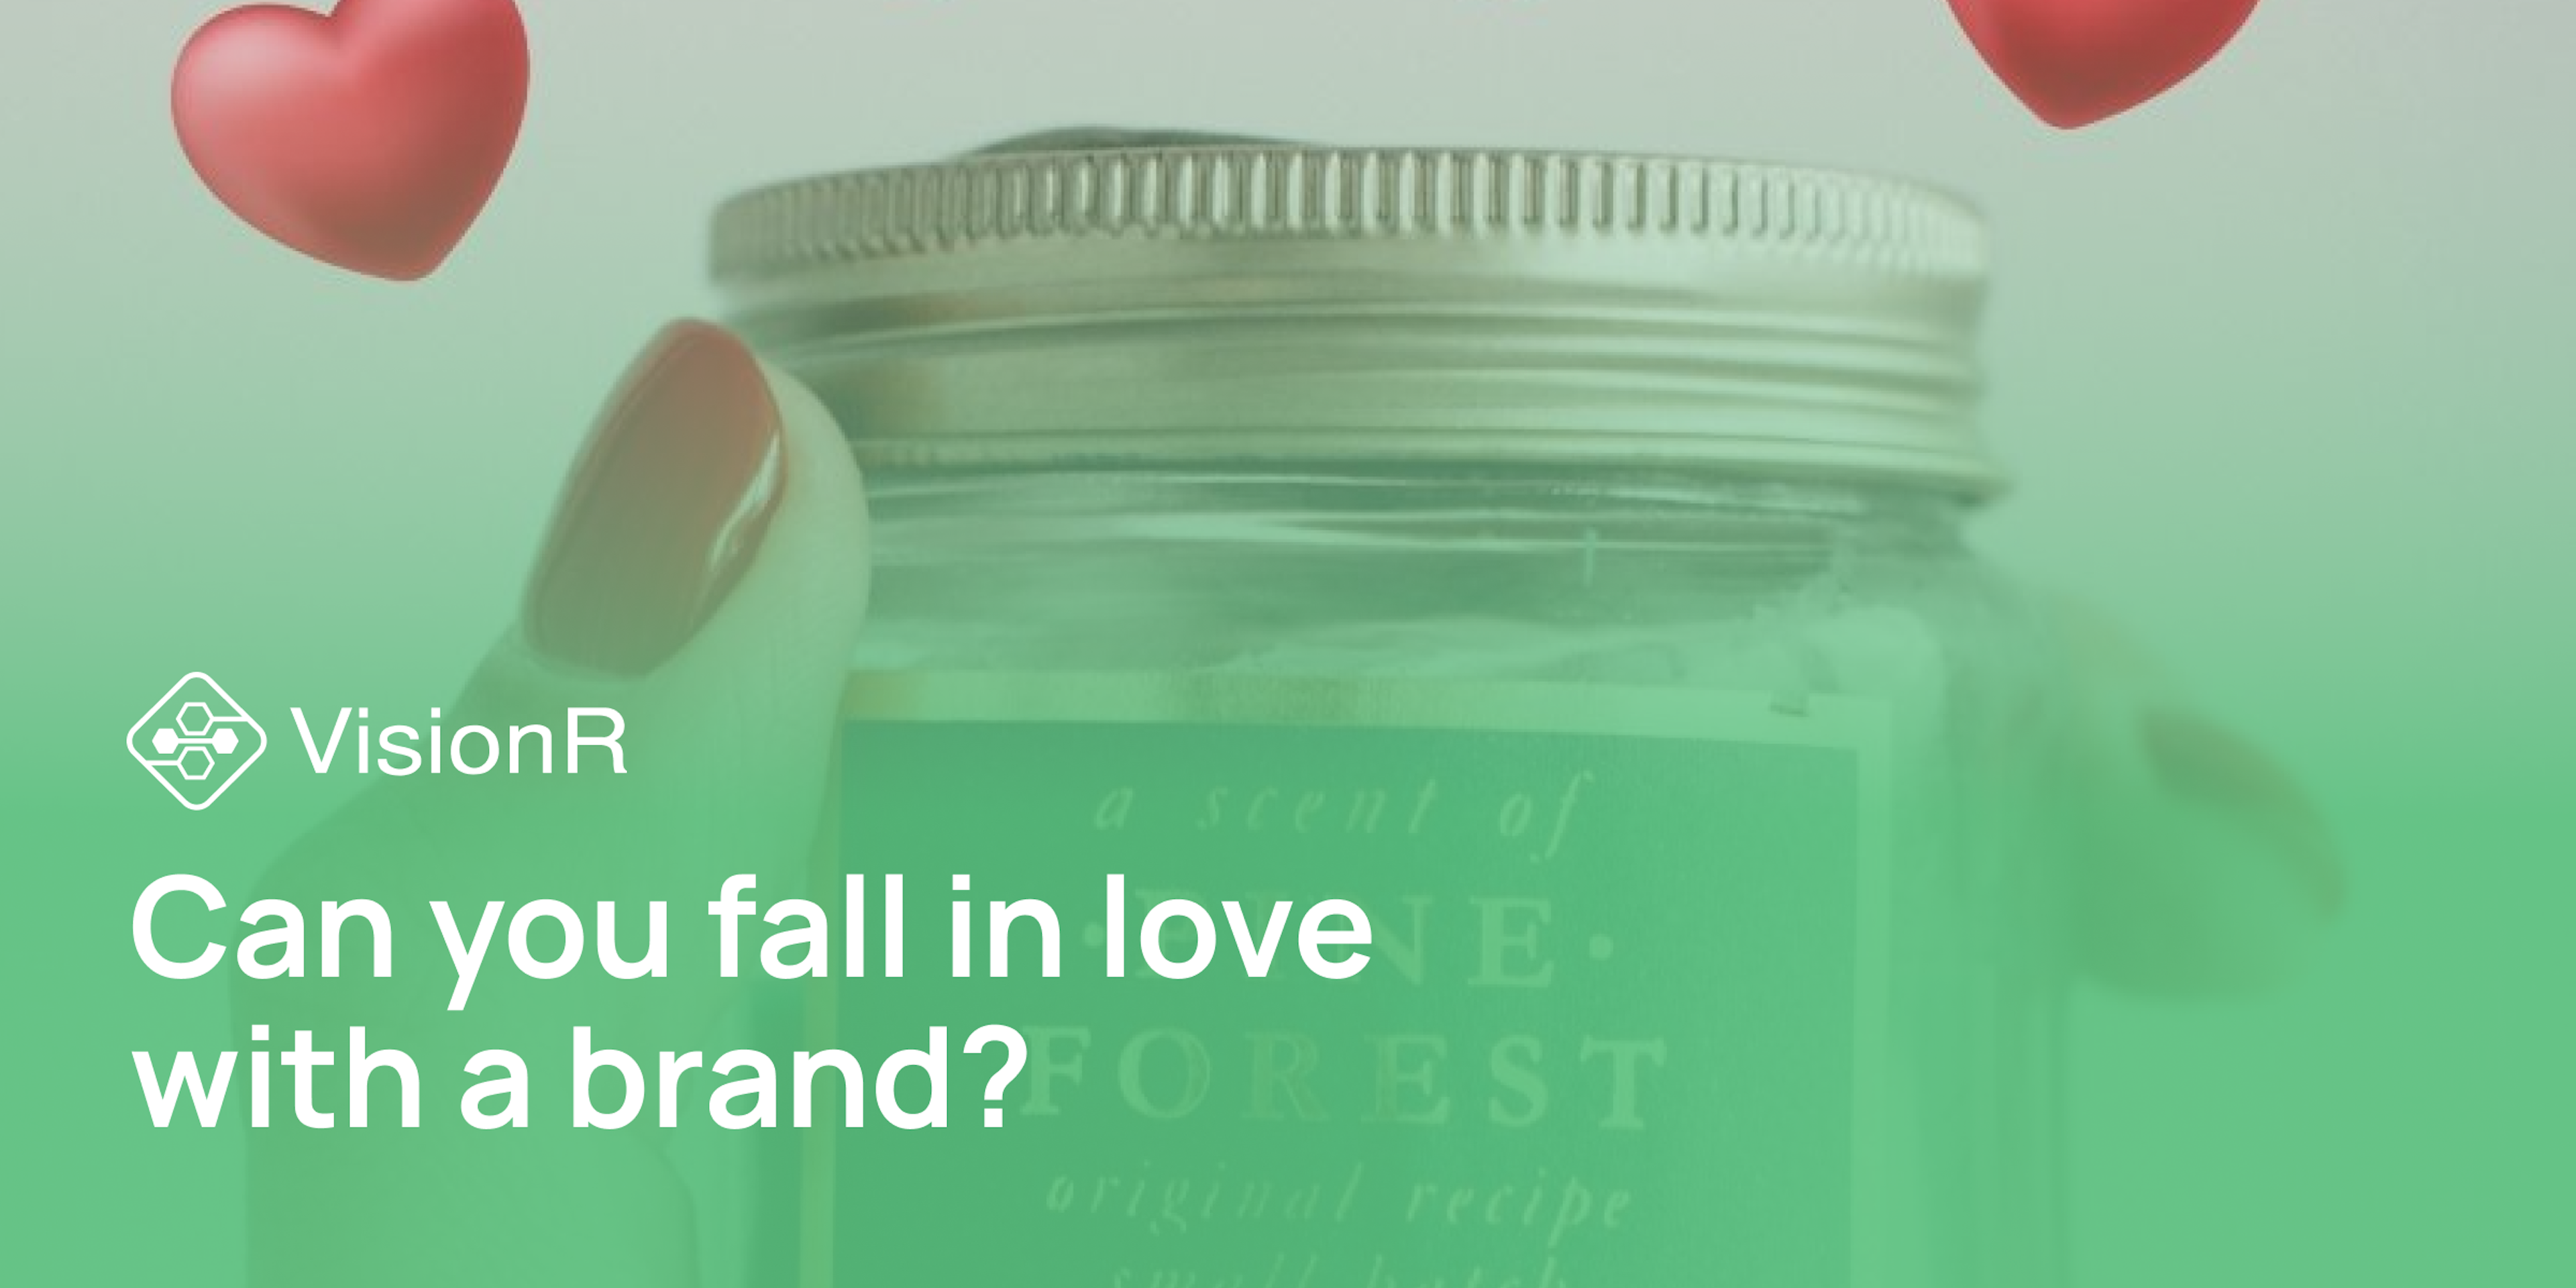 Can you fall in love with a brand?